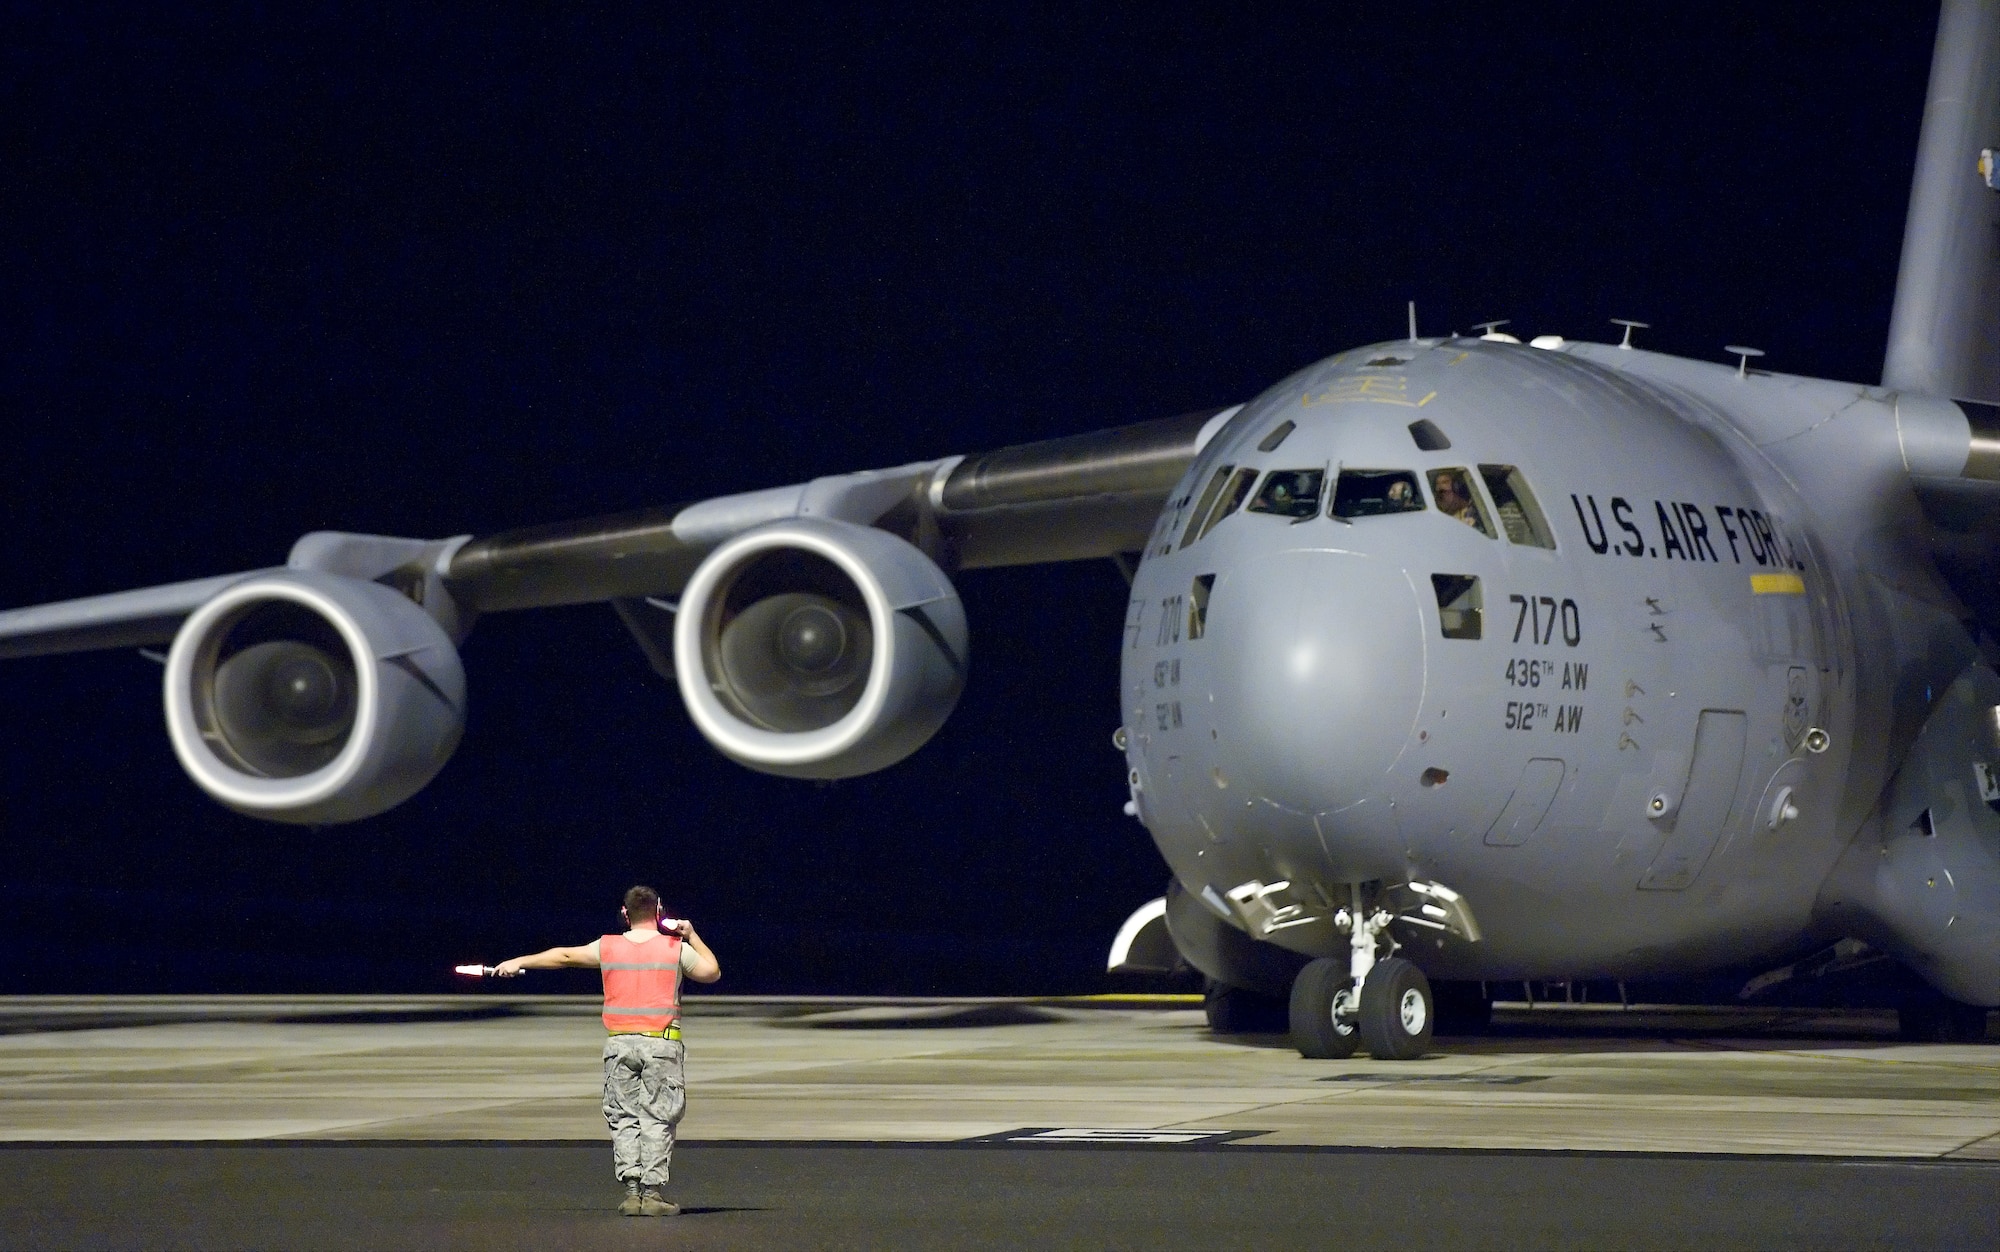 Aircraft maintenance personnel marshall out the last C-17 Globemaster III prior to the arrival of Hurricane Irene, on Aug. 26, 2011, at Dover Air Force Base, Del. (U.S. Air Force photo by Roland Balik)